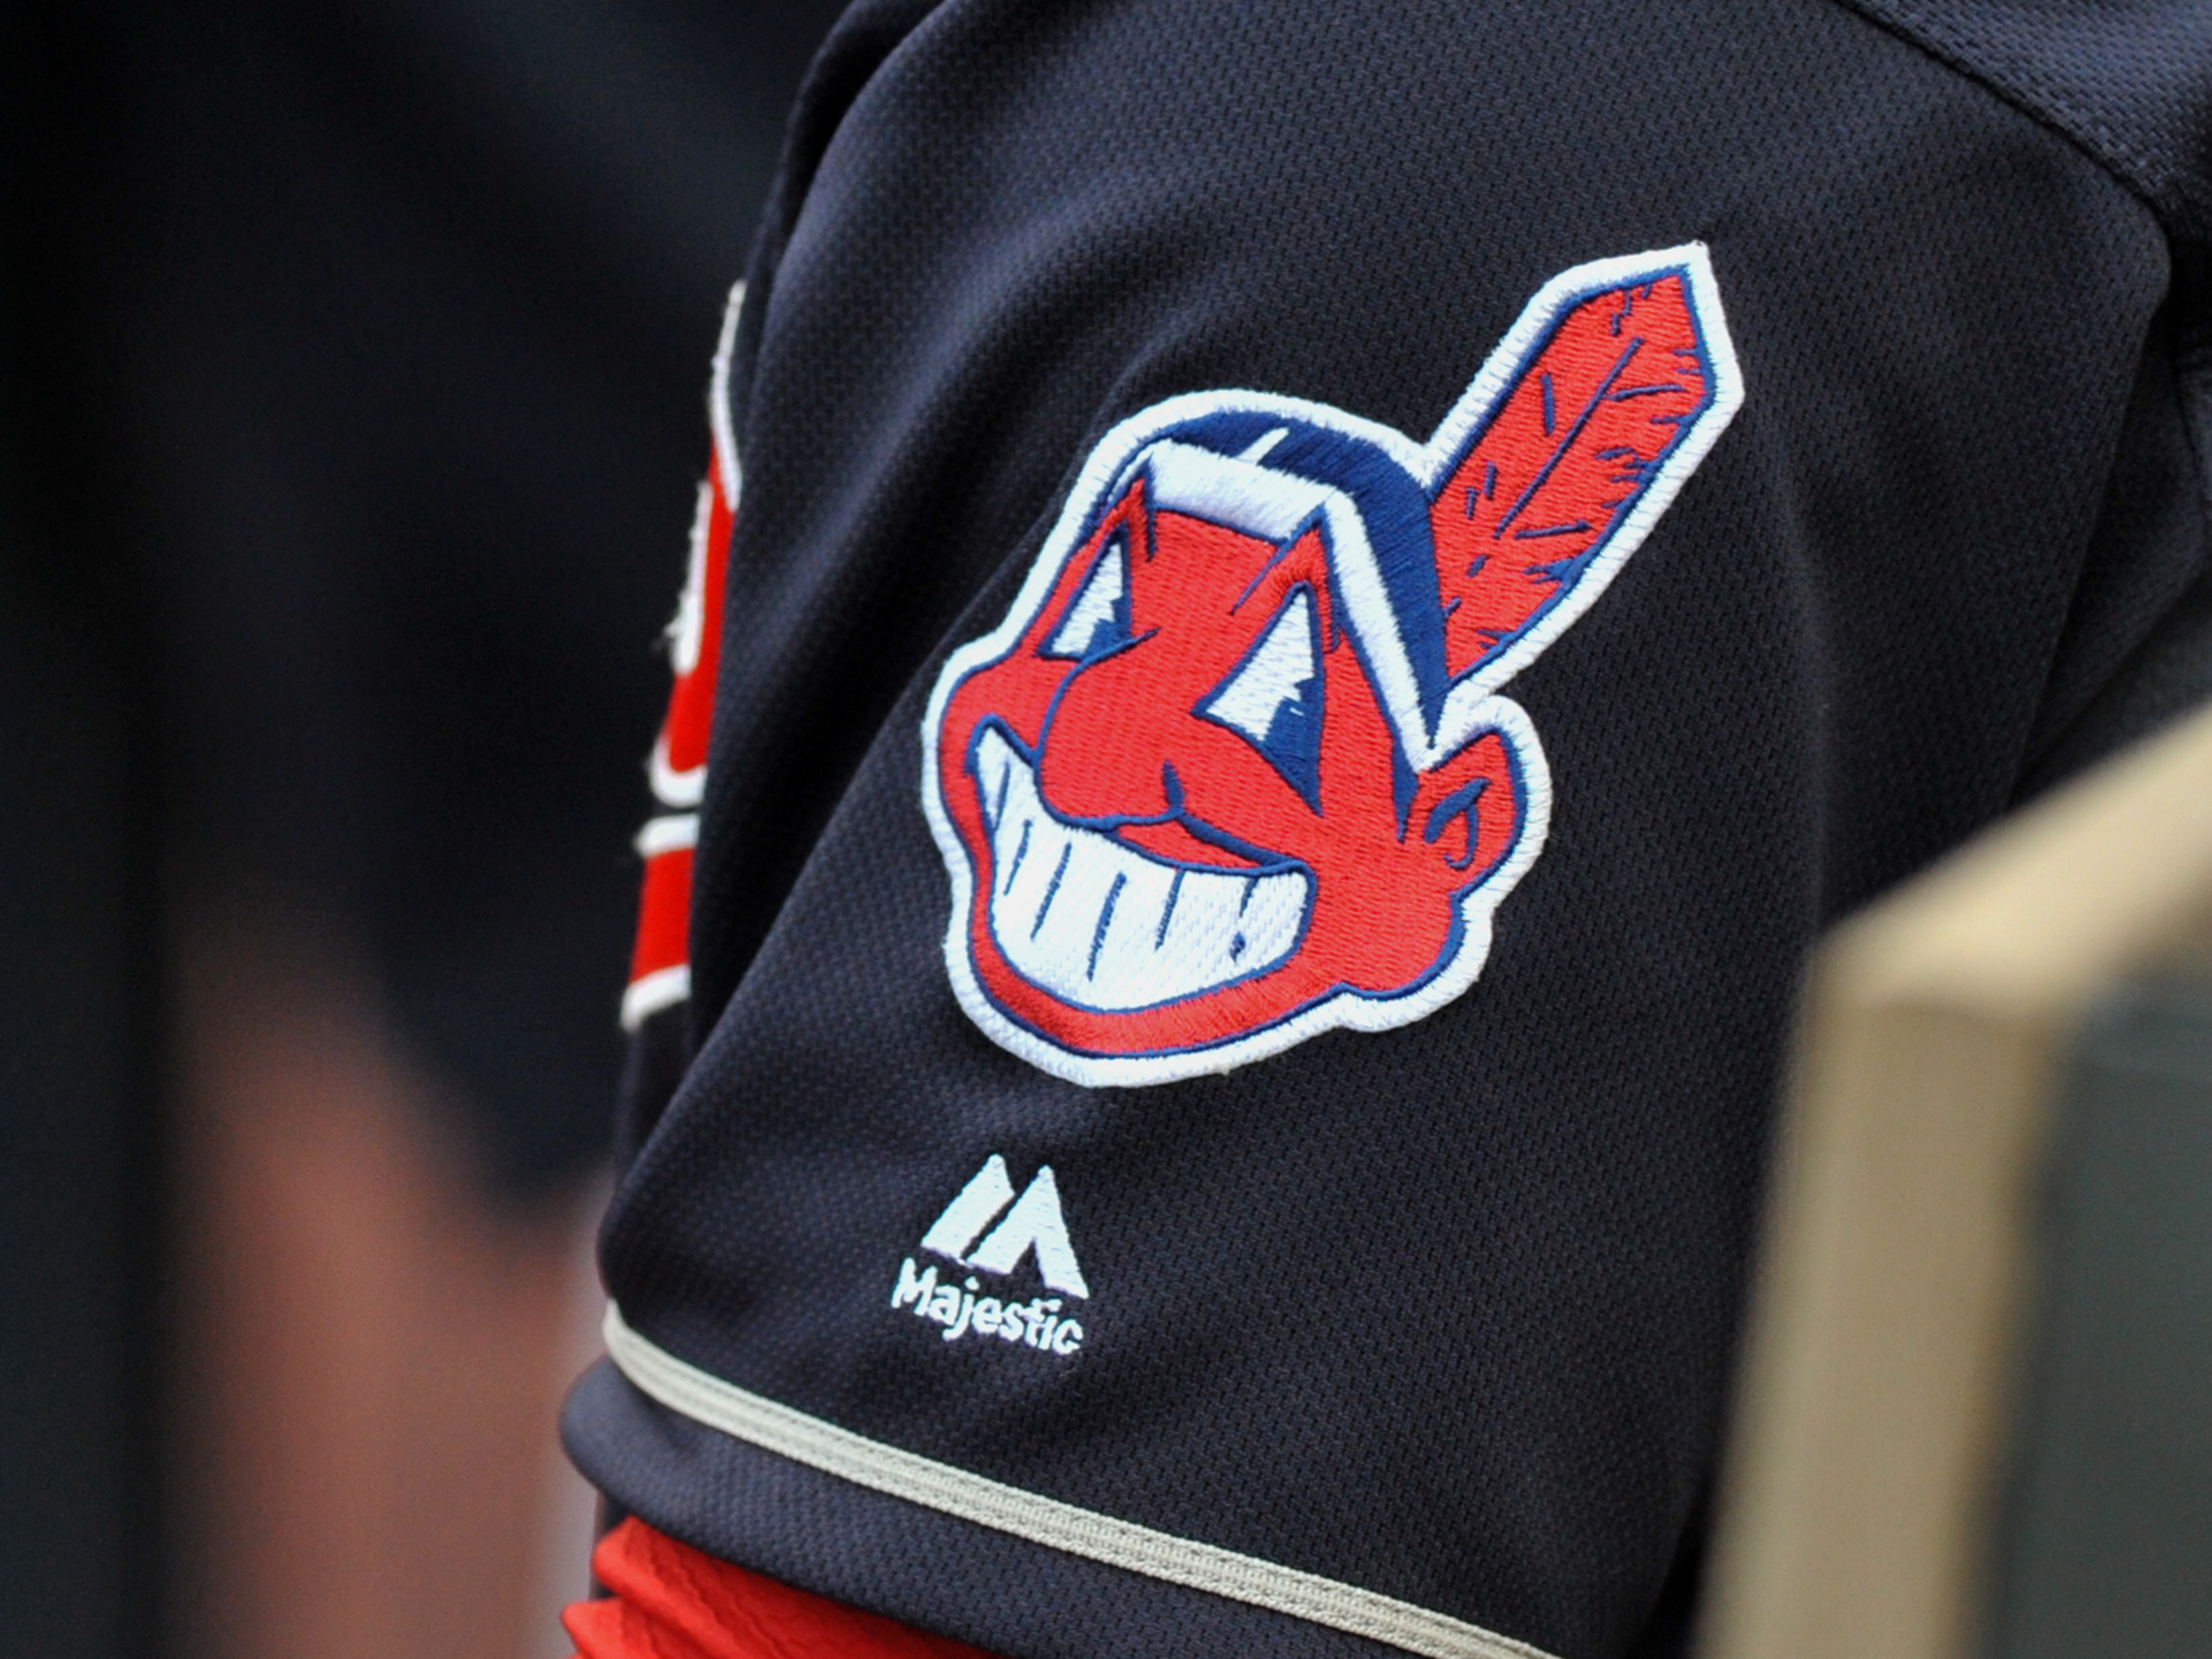 Is Cleveland Really Getting Rid of Chief Wahoo? - InsideHook